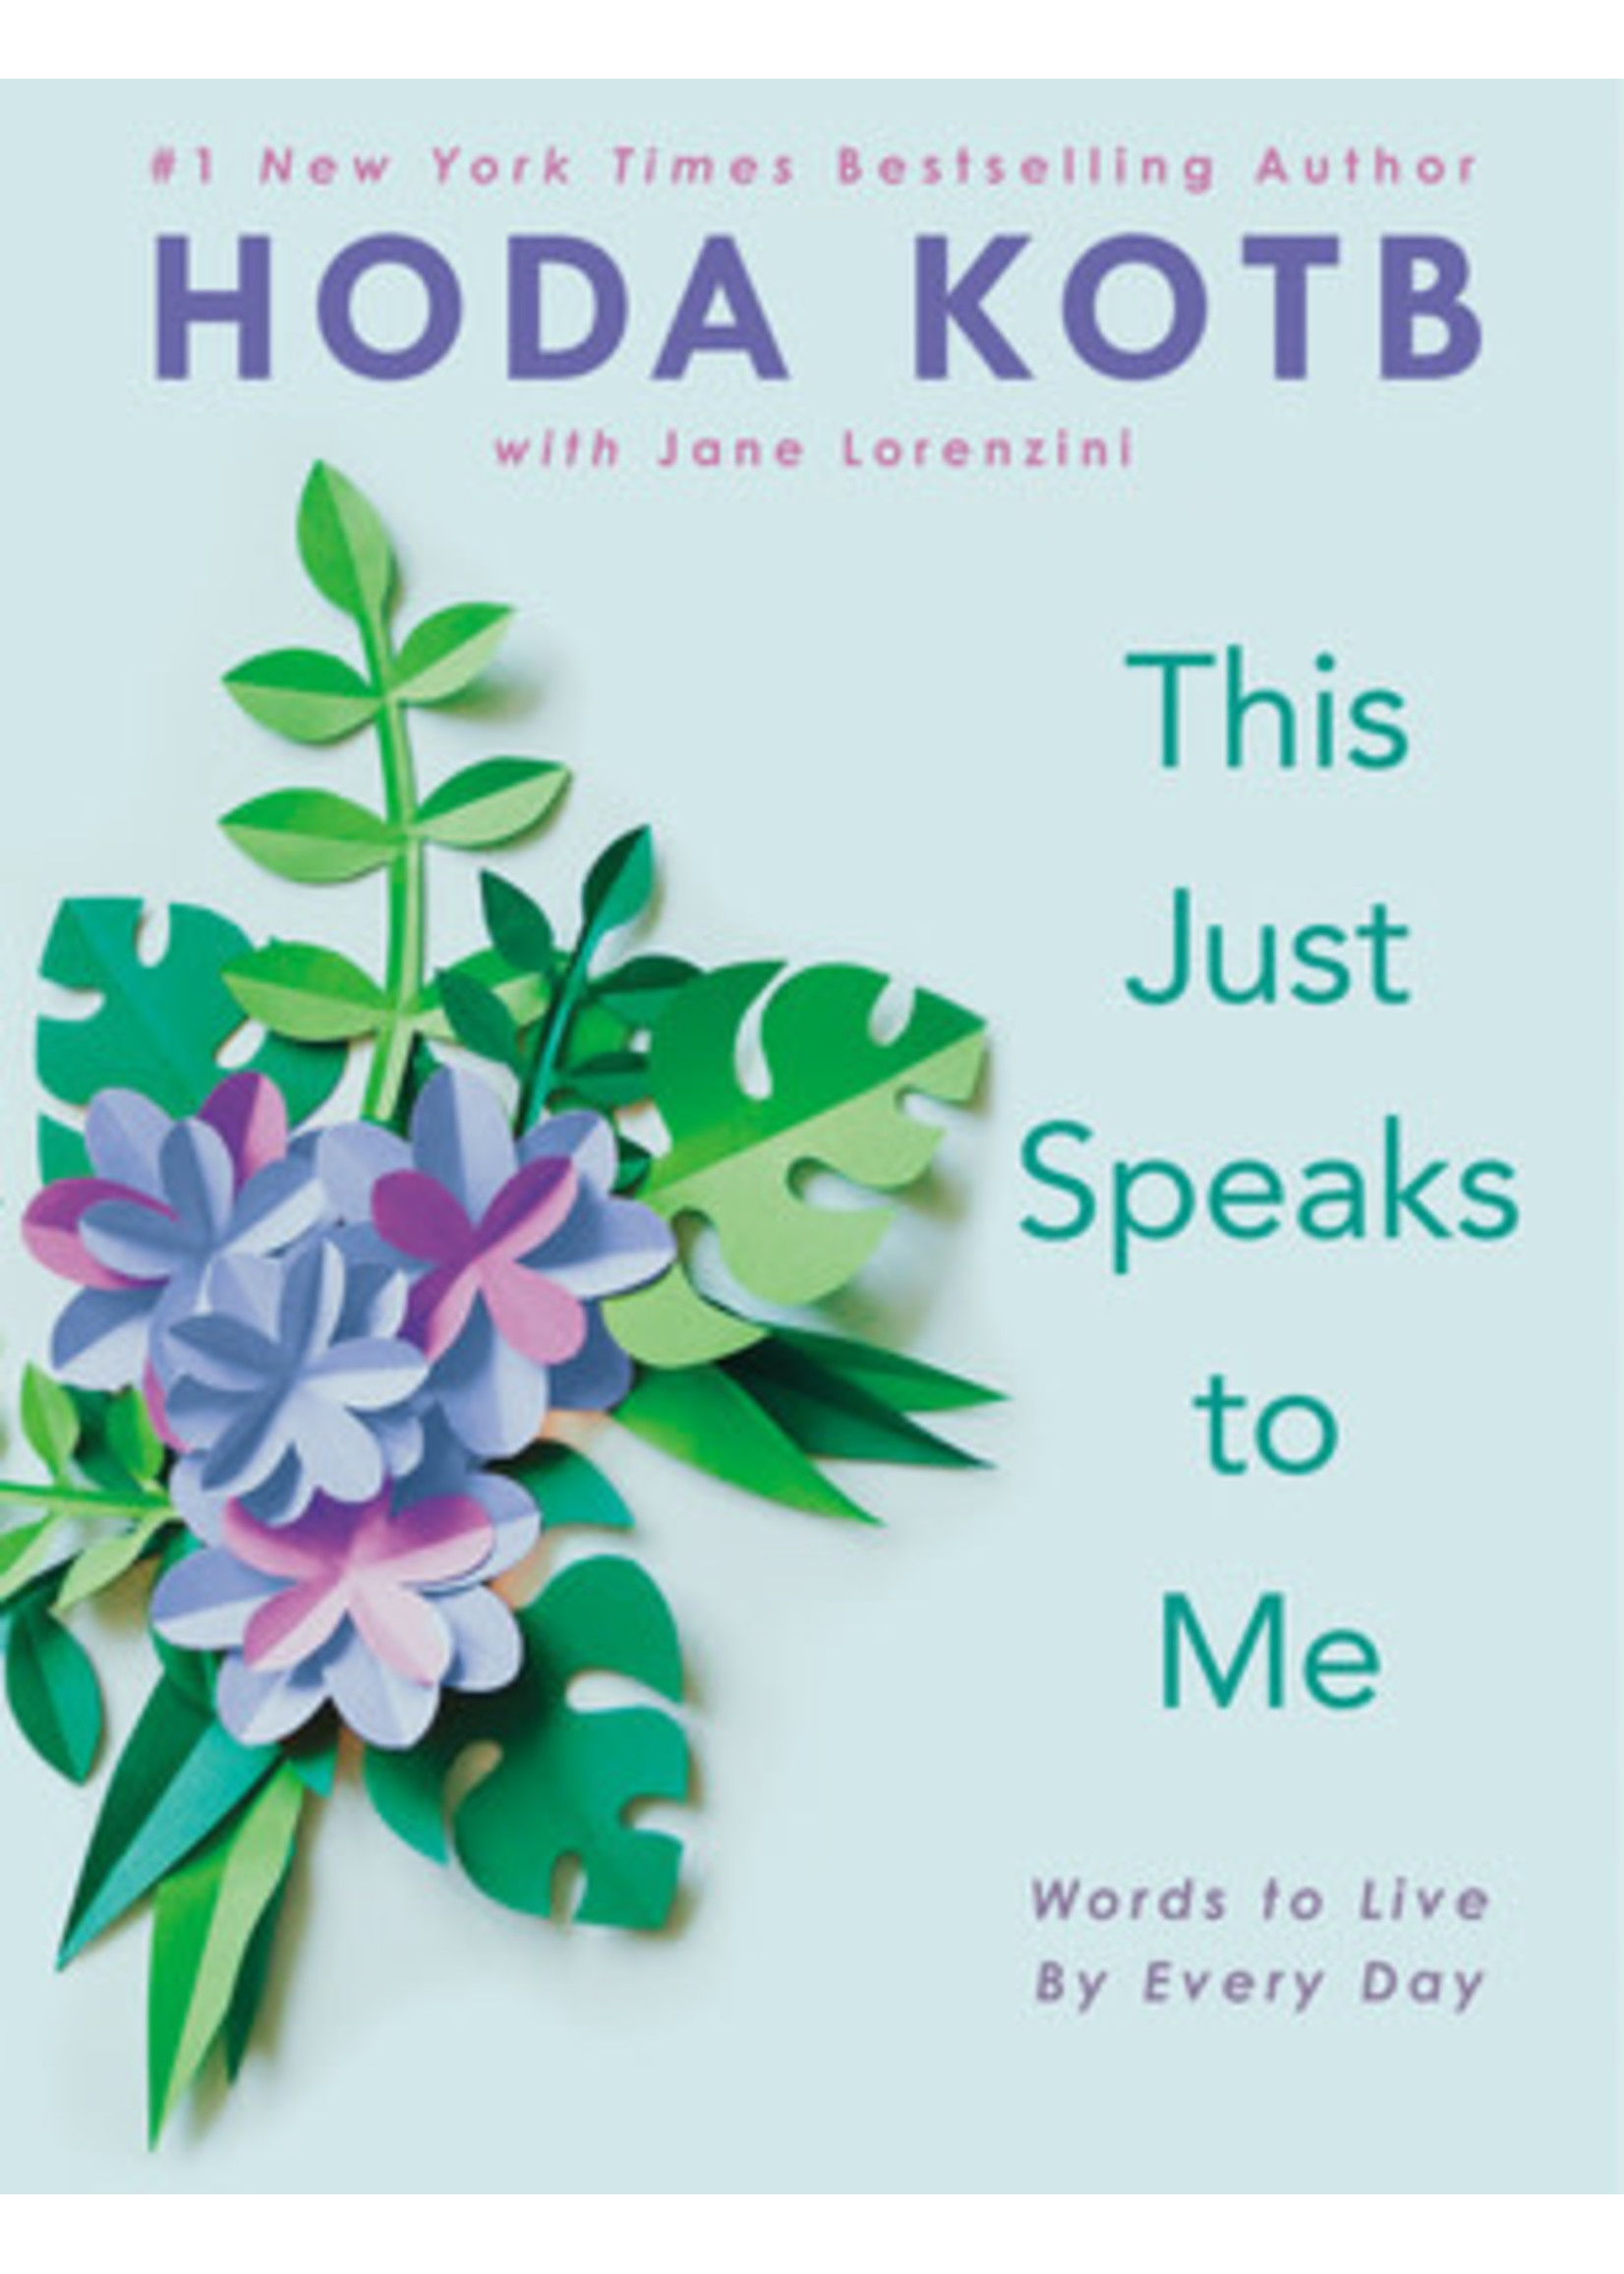 This Just Speaks to Me: Words to Live by Every Day by Hoda Kotb